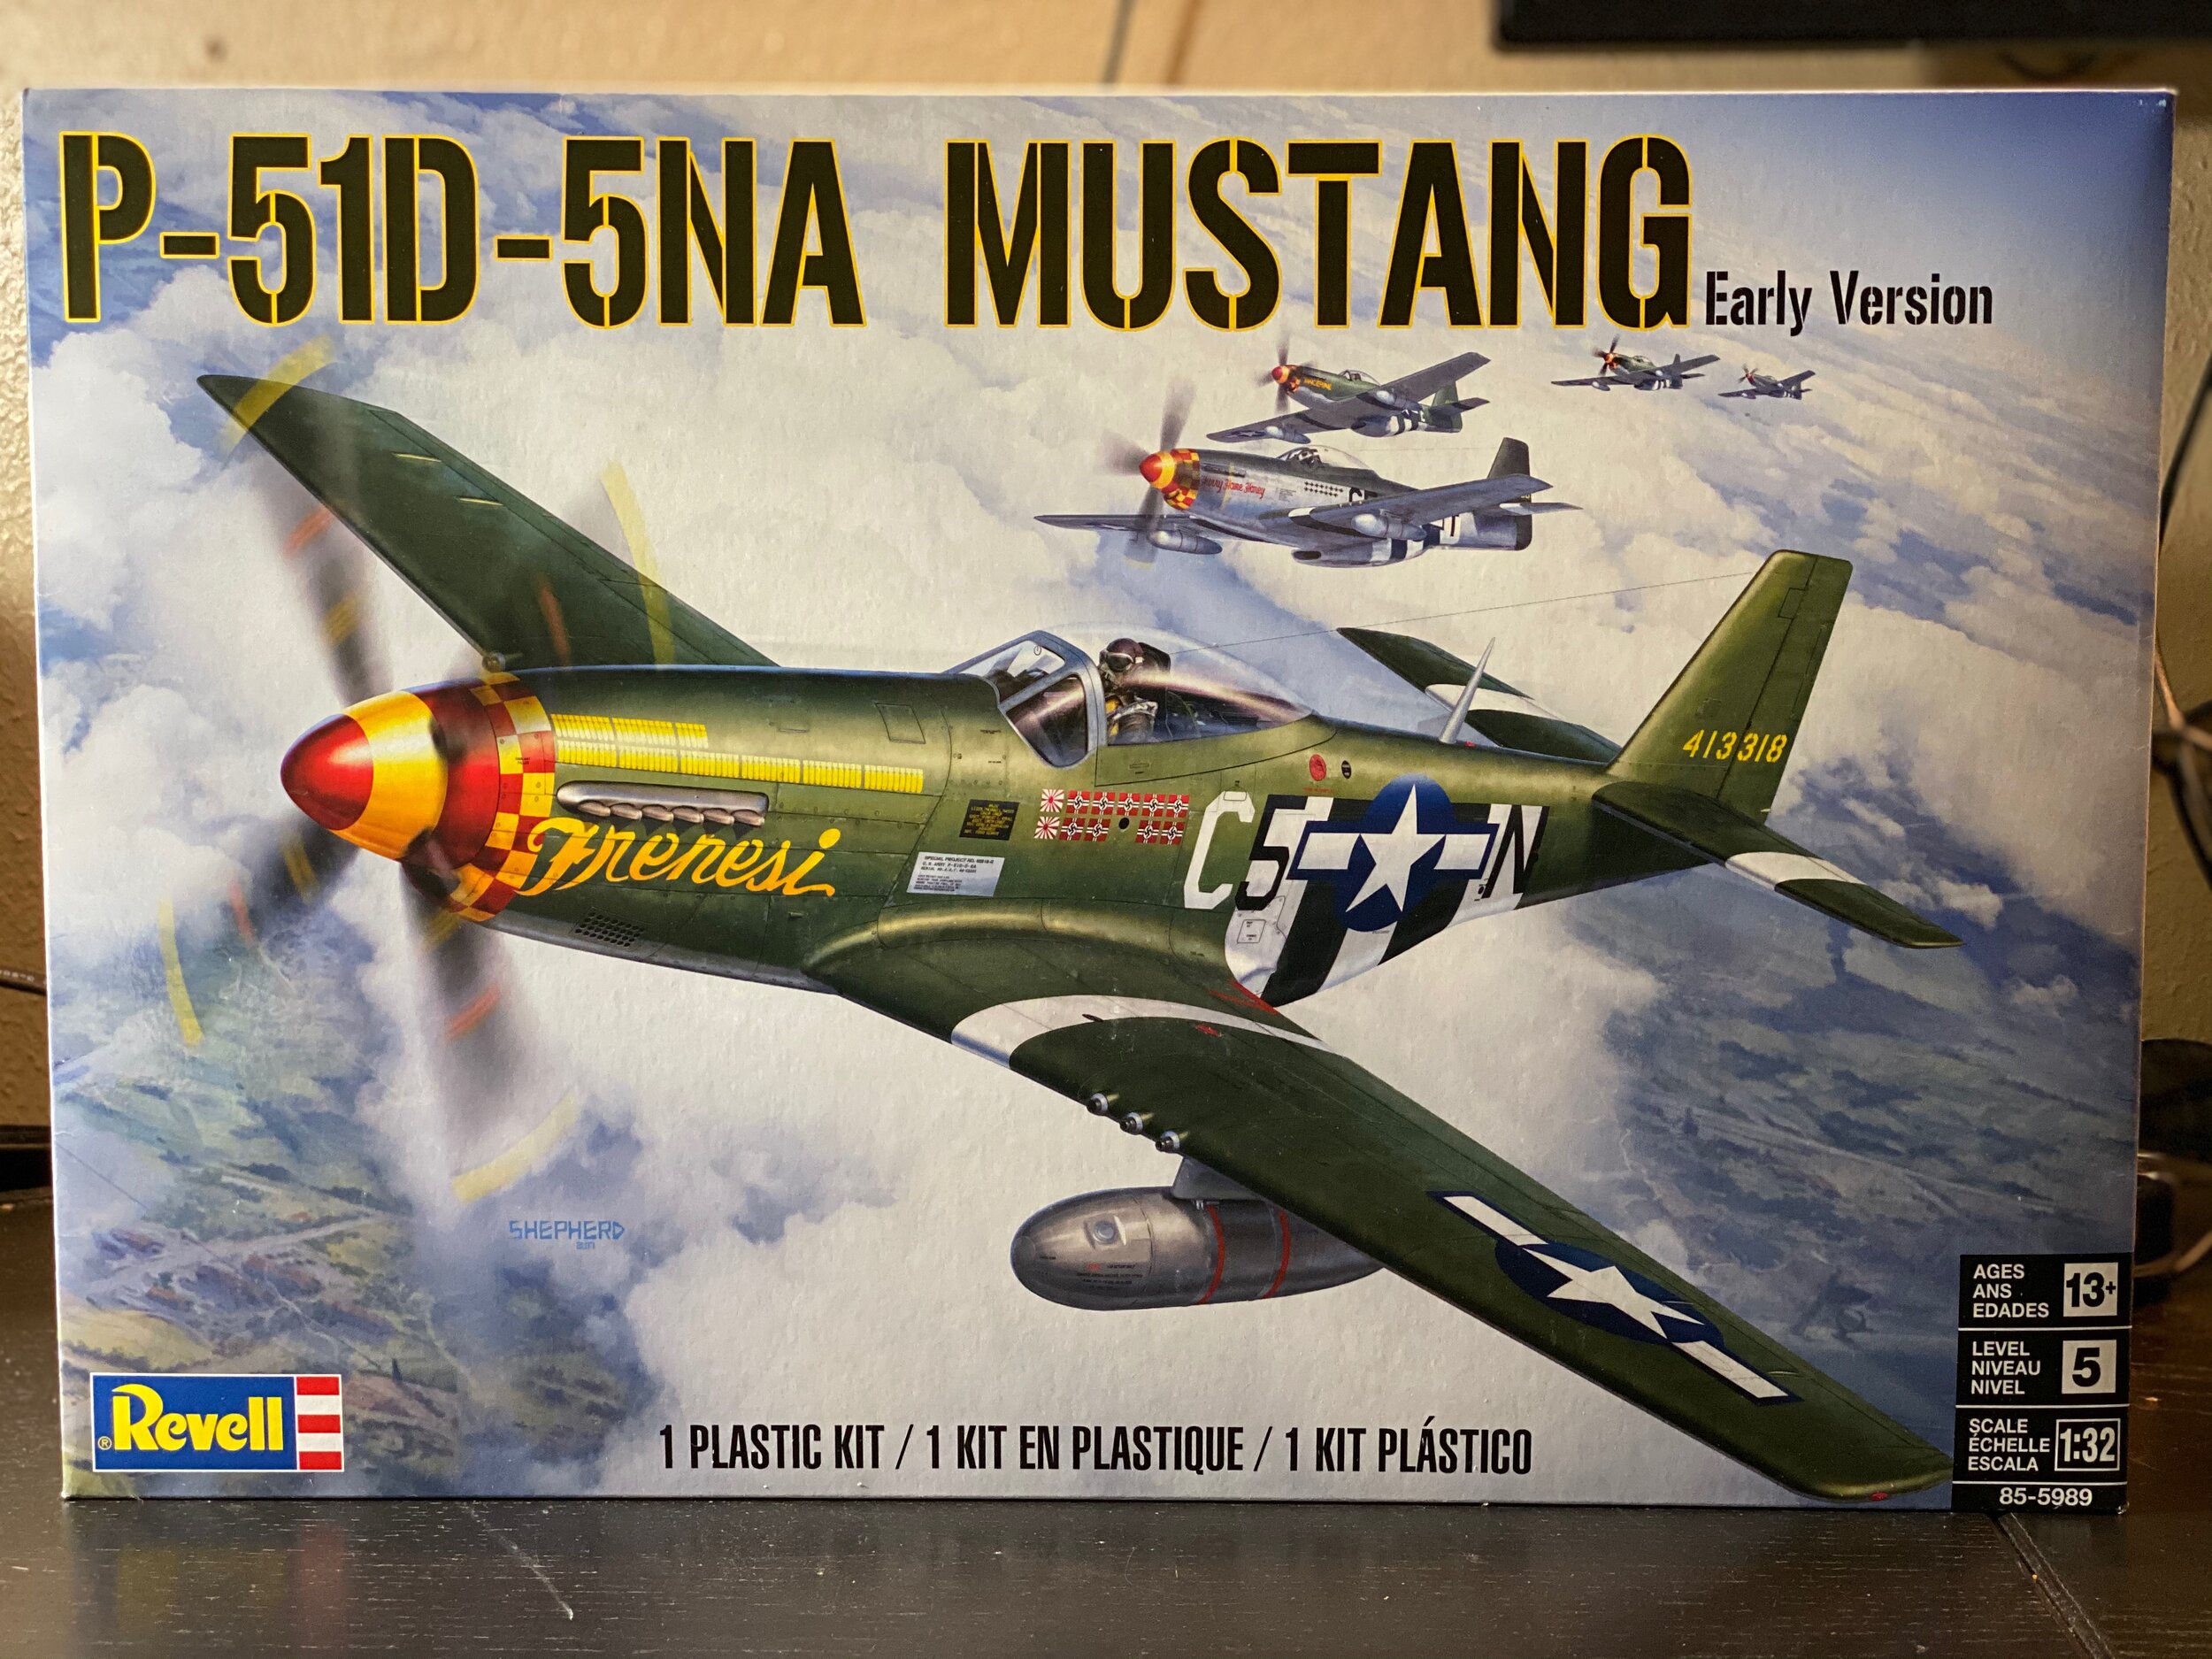 51D Mustang for sale online Revell 1:48 P 